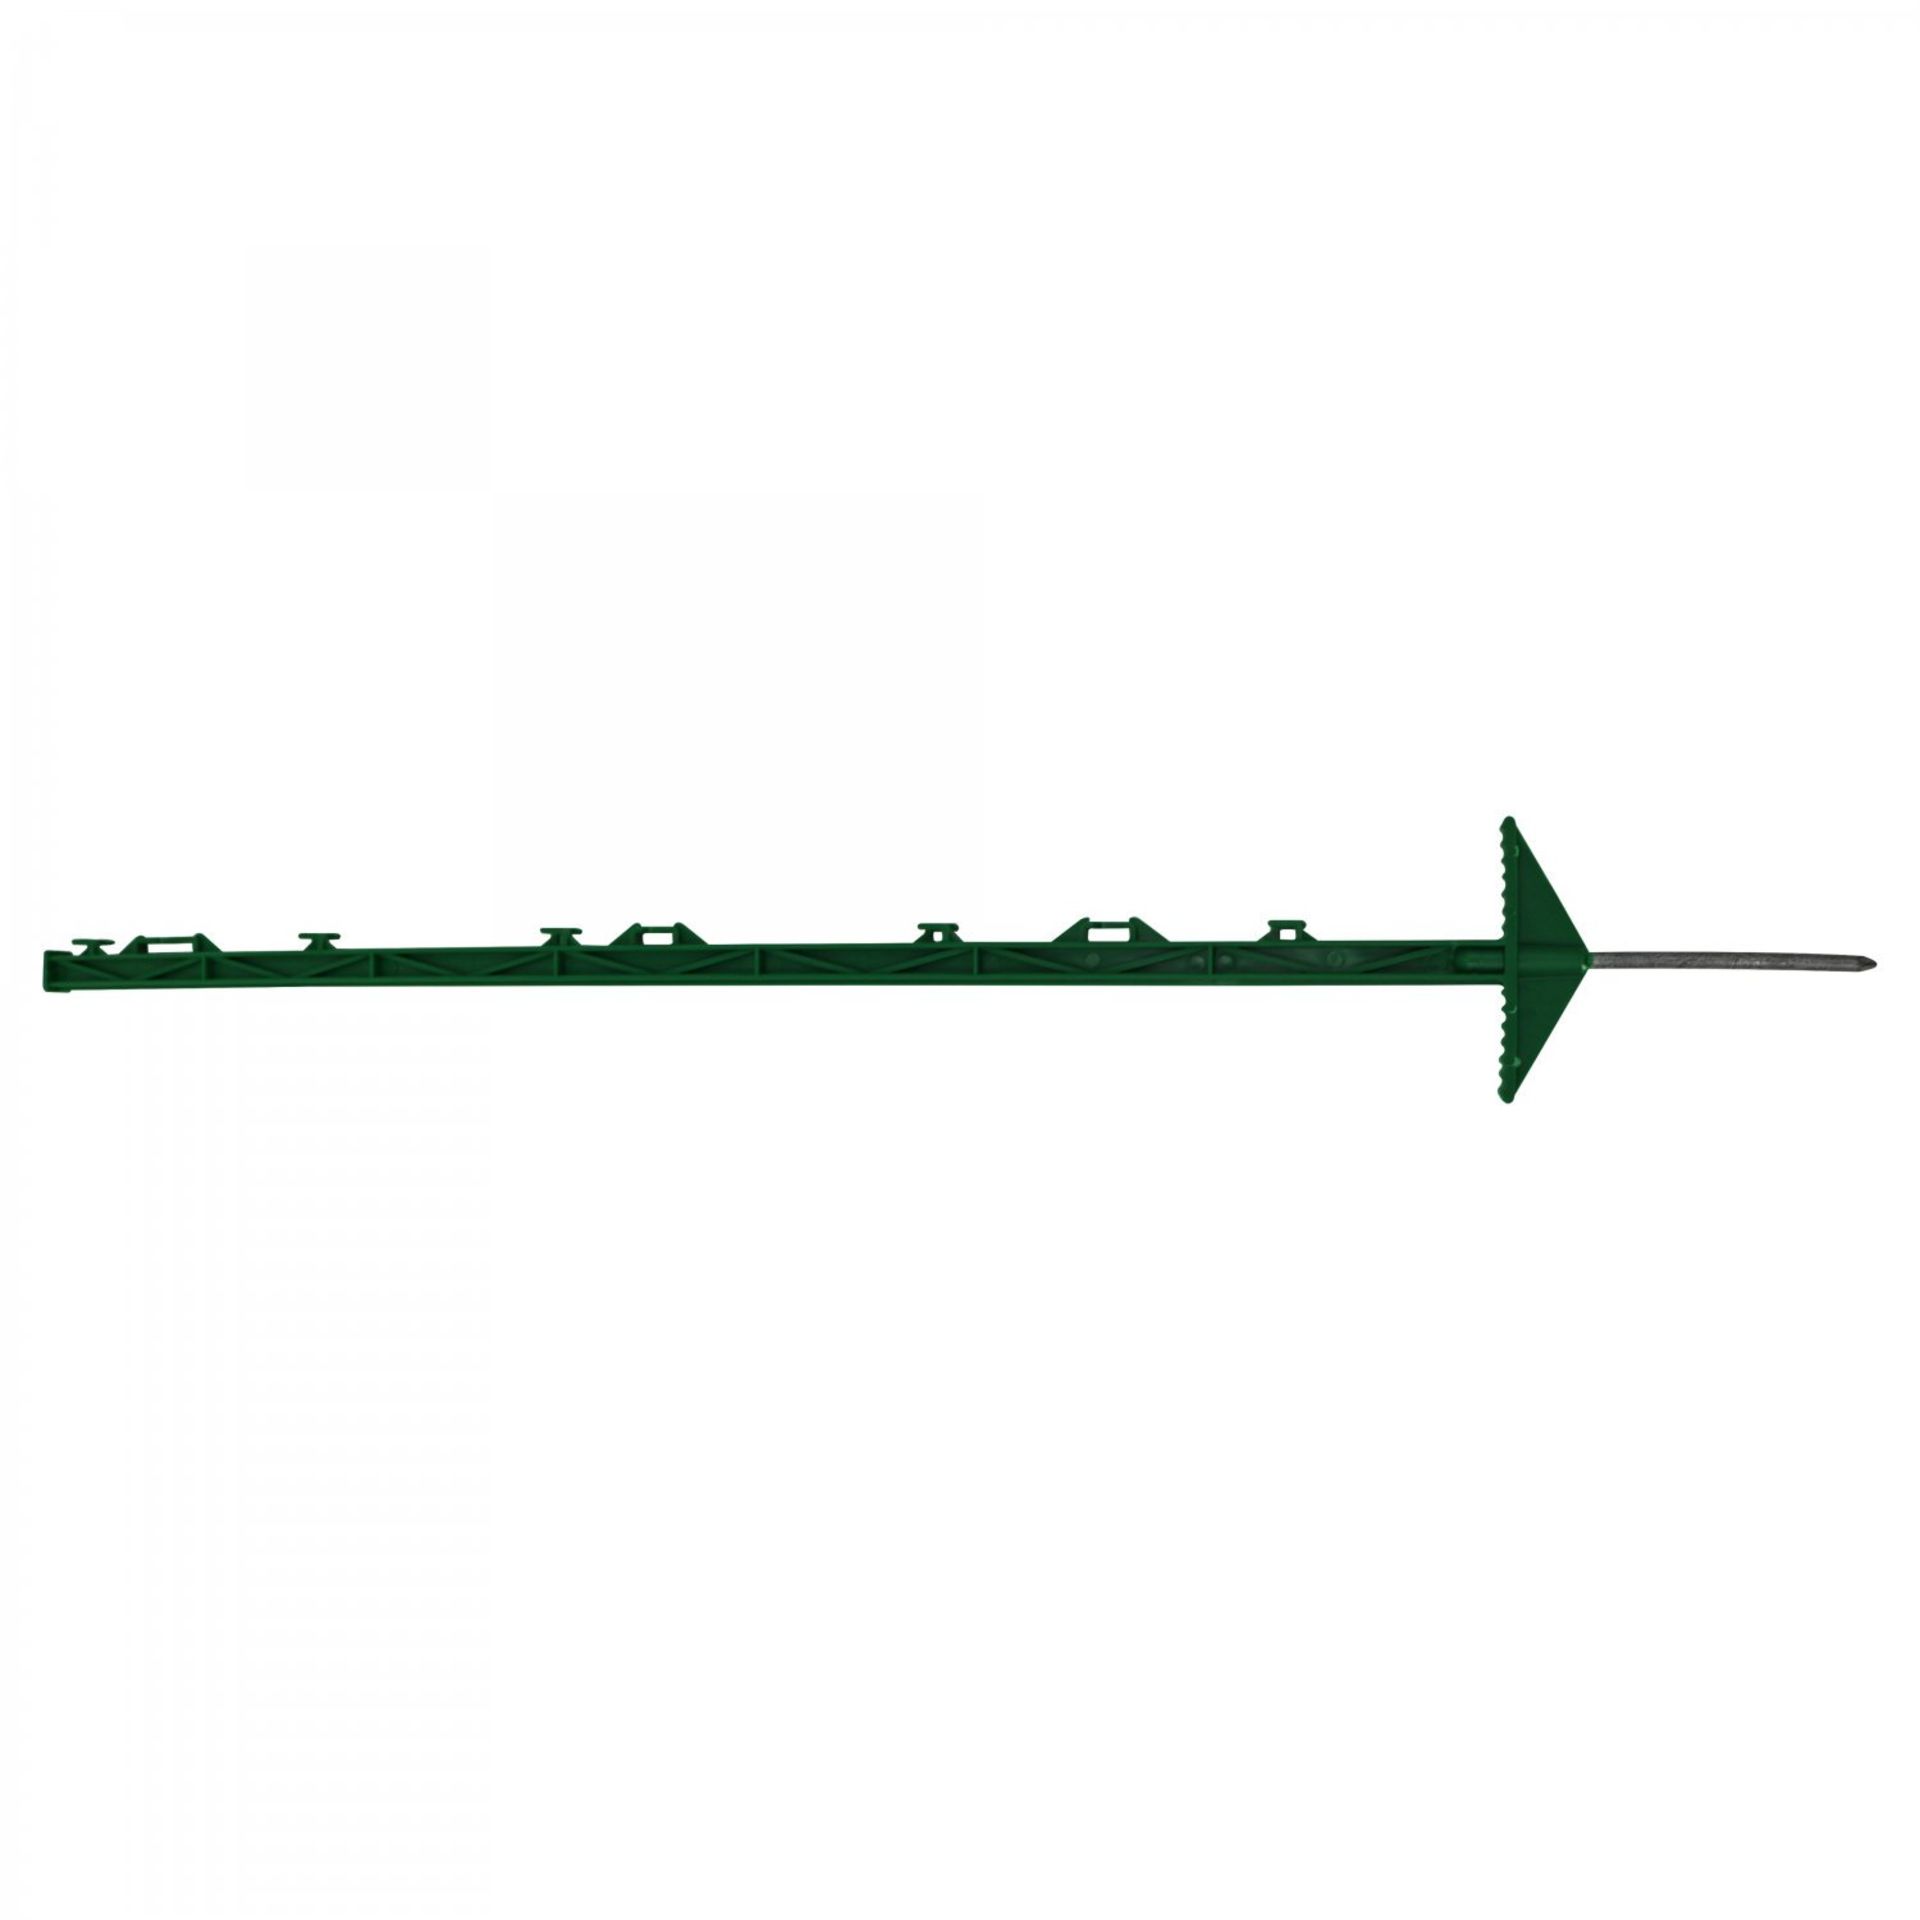 (D22) 1m Green Plastic Electric Fencing Pins Posts Stakes Pack of 10 Length: 1m Heavy Duty St... - Image 2 of 2